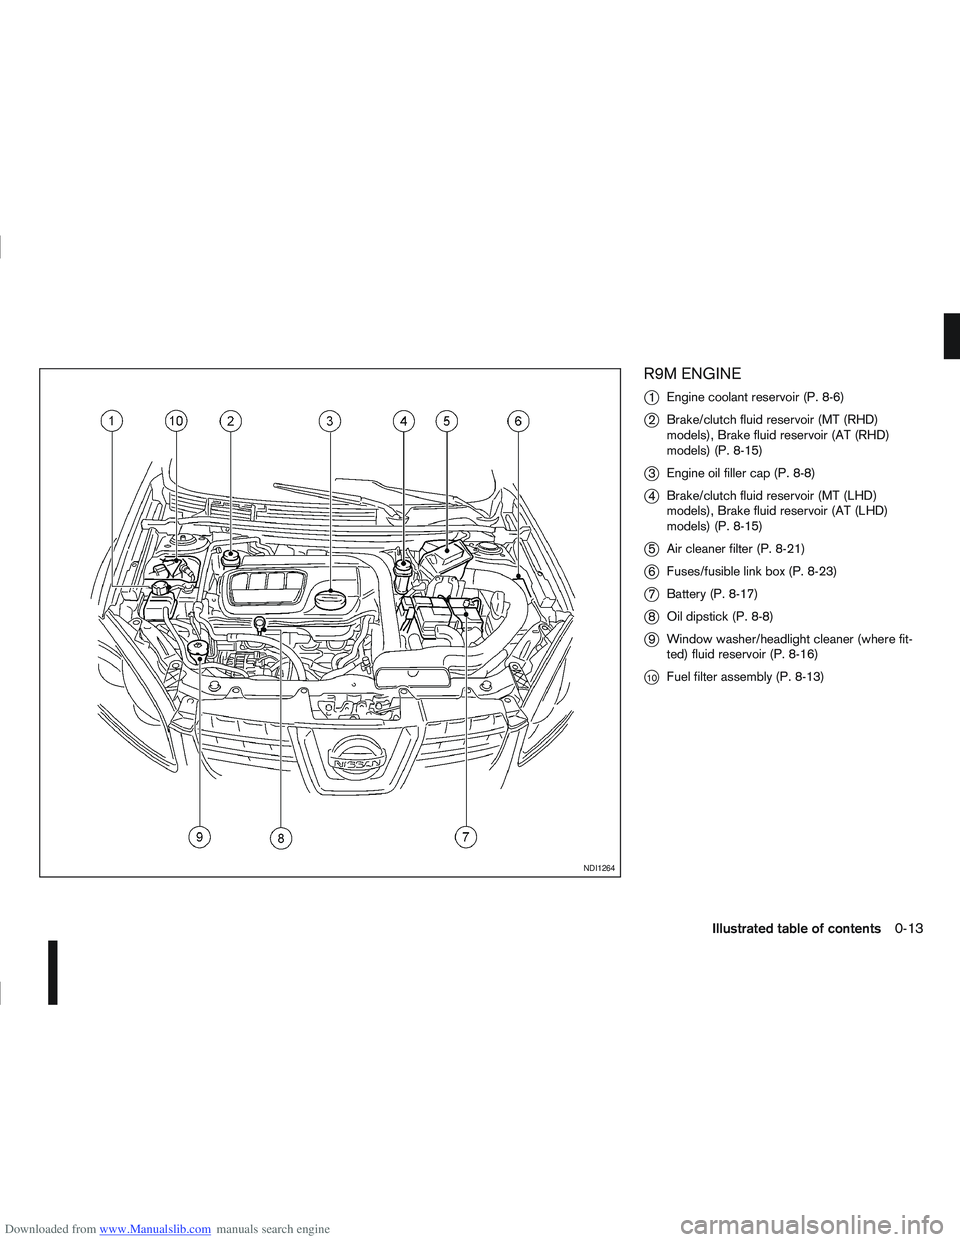 NISSAN QASHQAI 2008  Owners Manual Downloaded from www.Manualslib.com manuals search engine R9M ENGINE
j
1Engine coolant reservoir (P. 8-6)
j2Brake/clutch fluid reservoir (MT (RHD)
models), Brake fluid reservoir (AT (RHD)
models) (P. 8